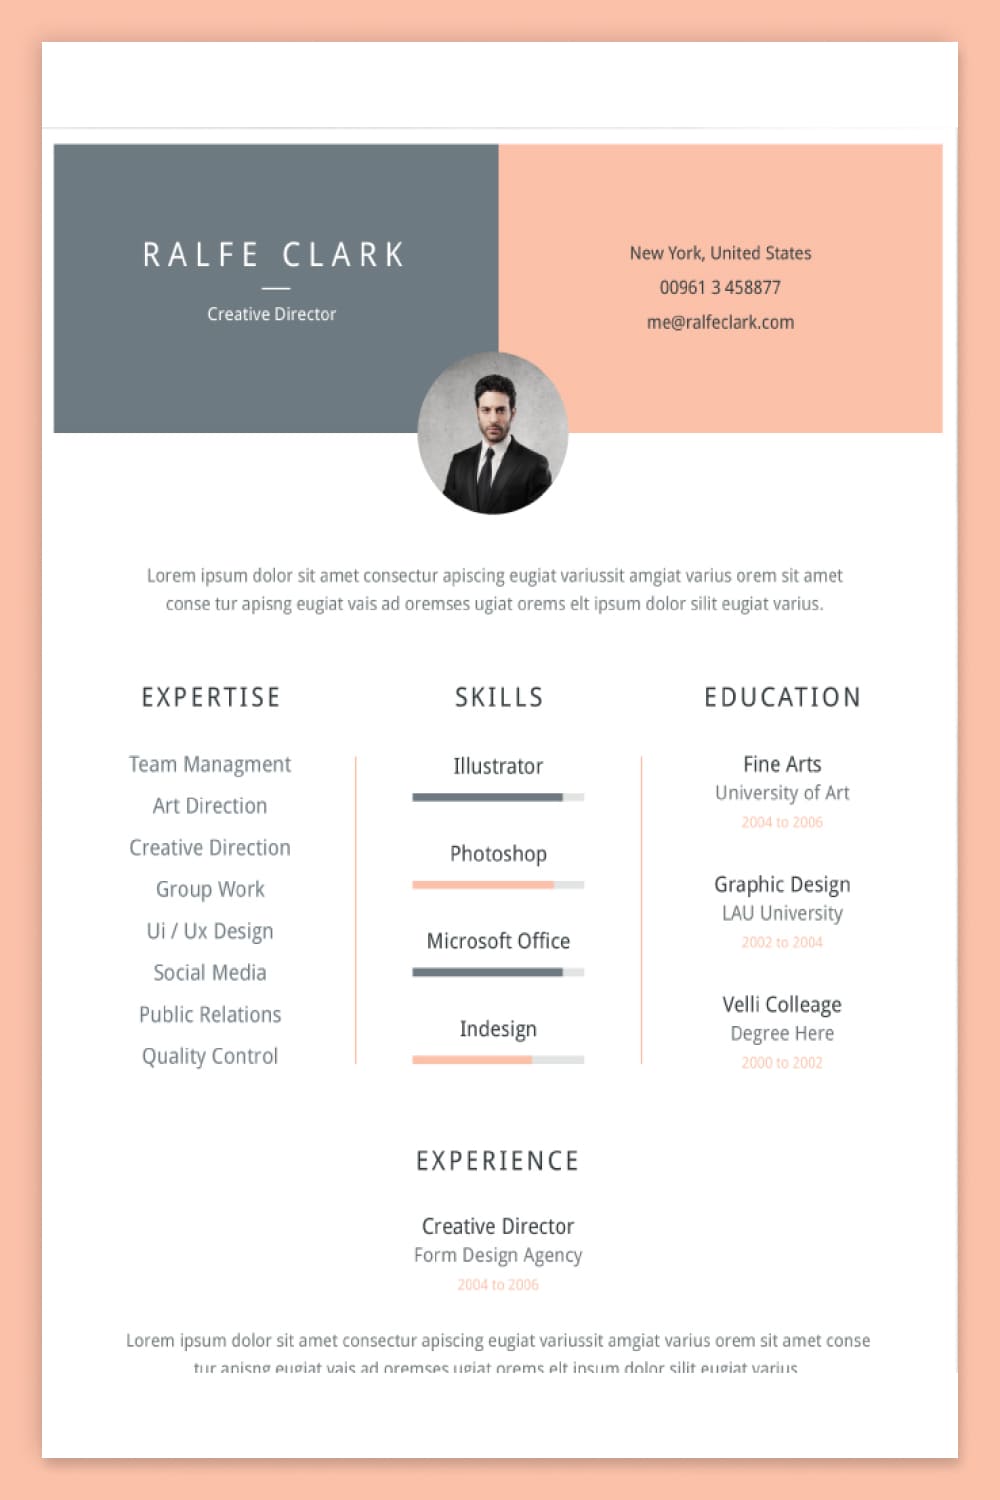 Screenshot of a resume with a photo, three columns and a gray, beige color scheme.